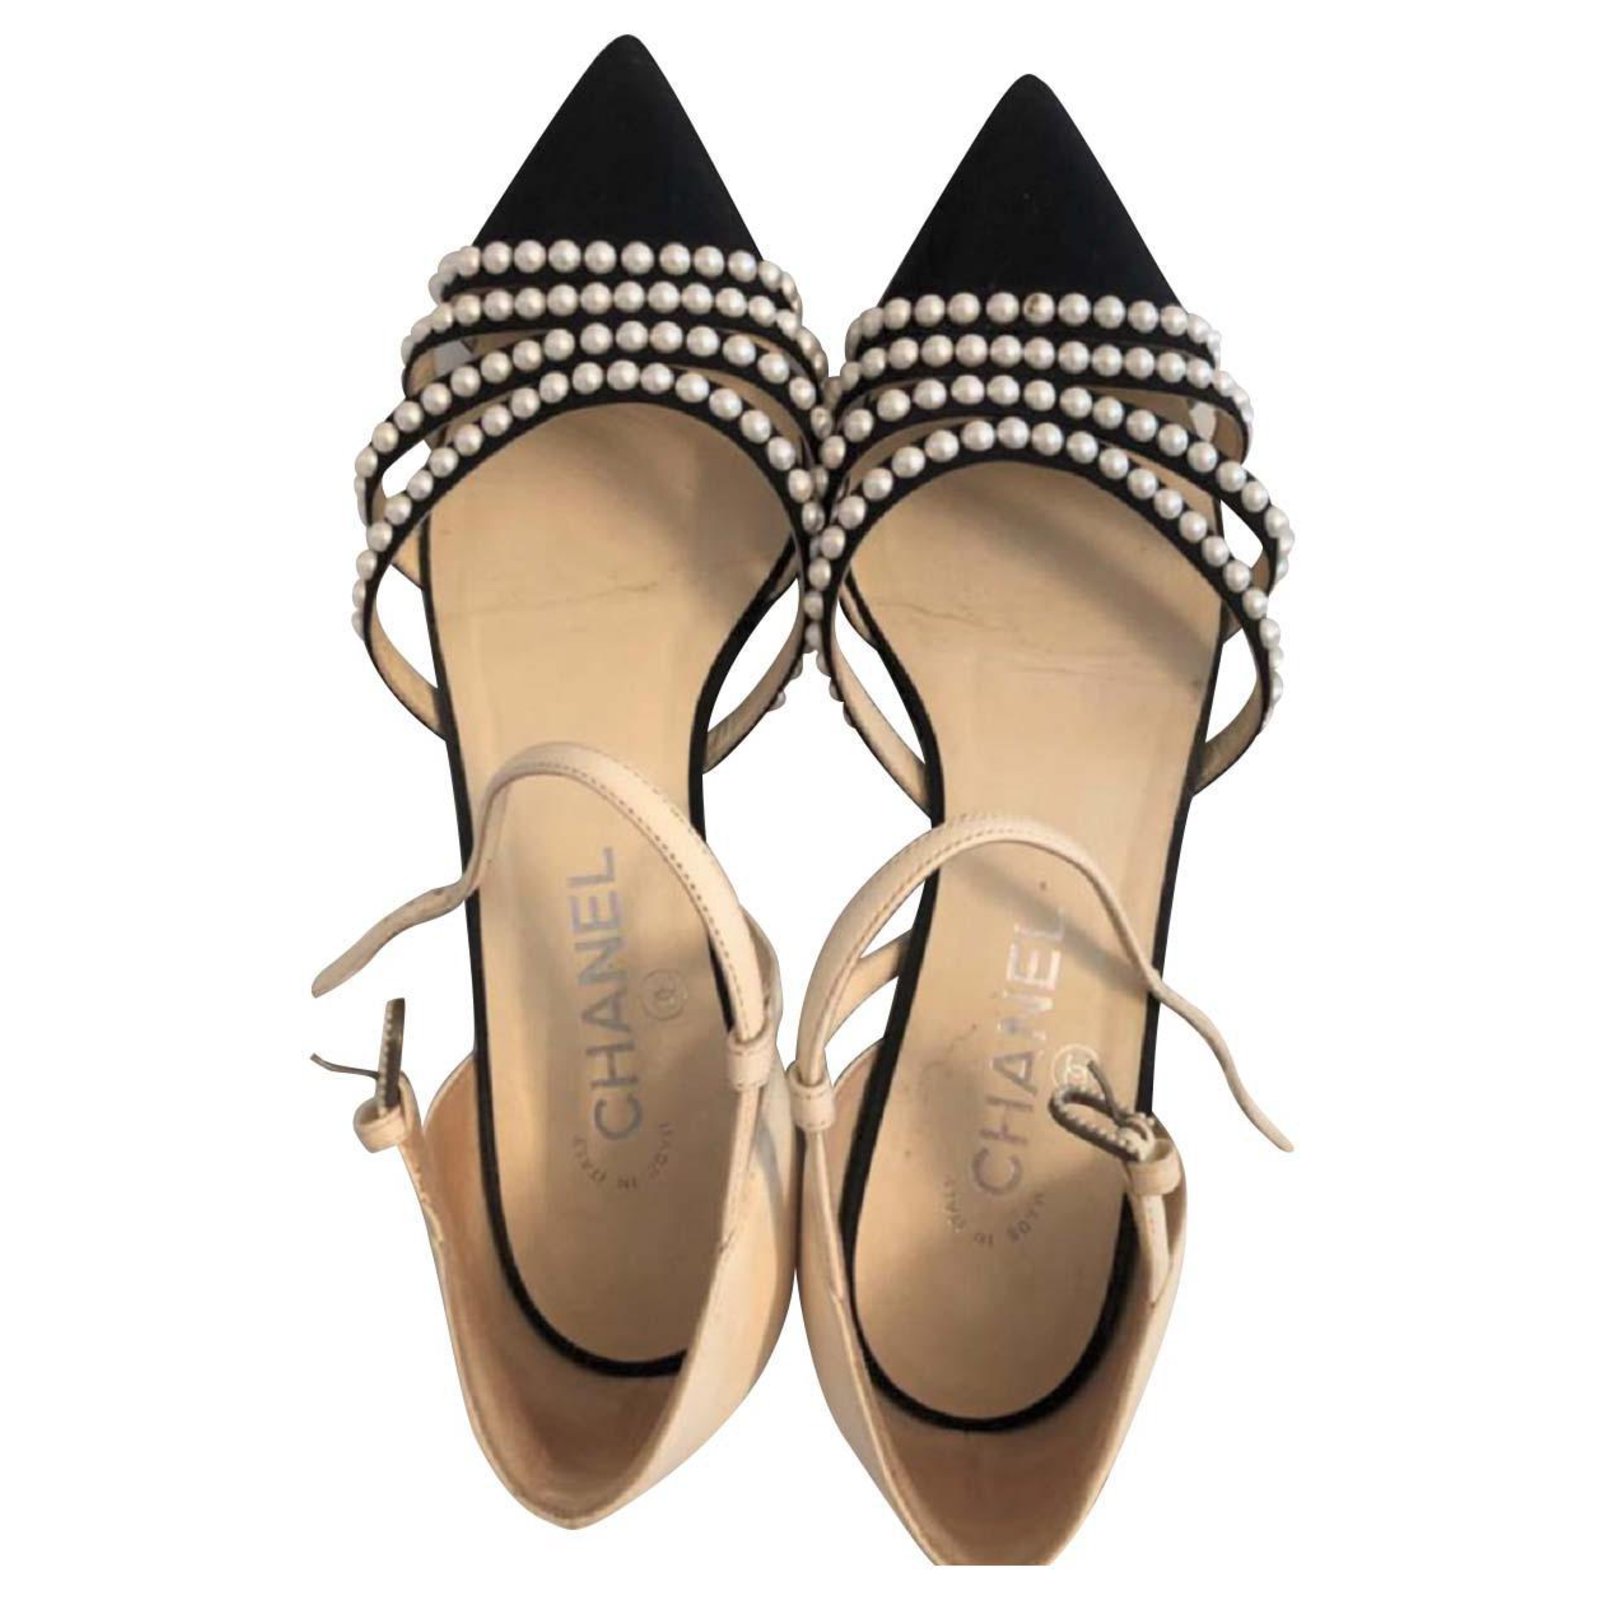 Authentic Second Hand Chanel CC Pearl Mules PSS05900105  THE FIFTH  COLLECTION